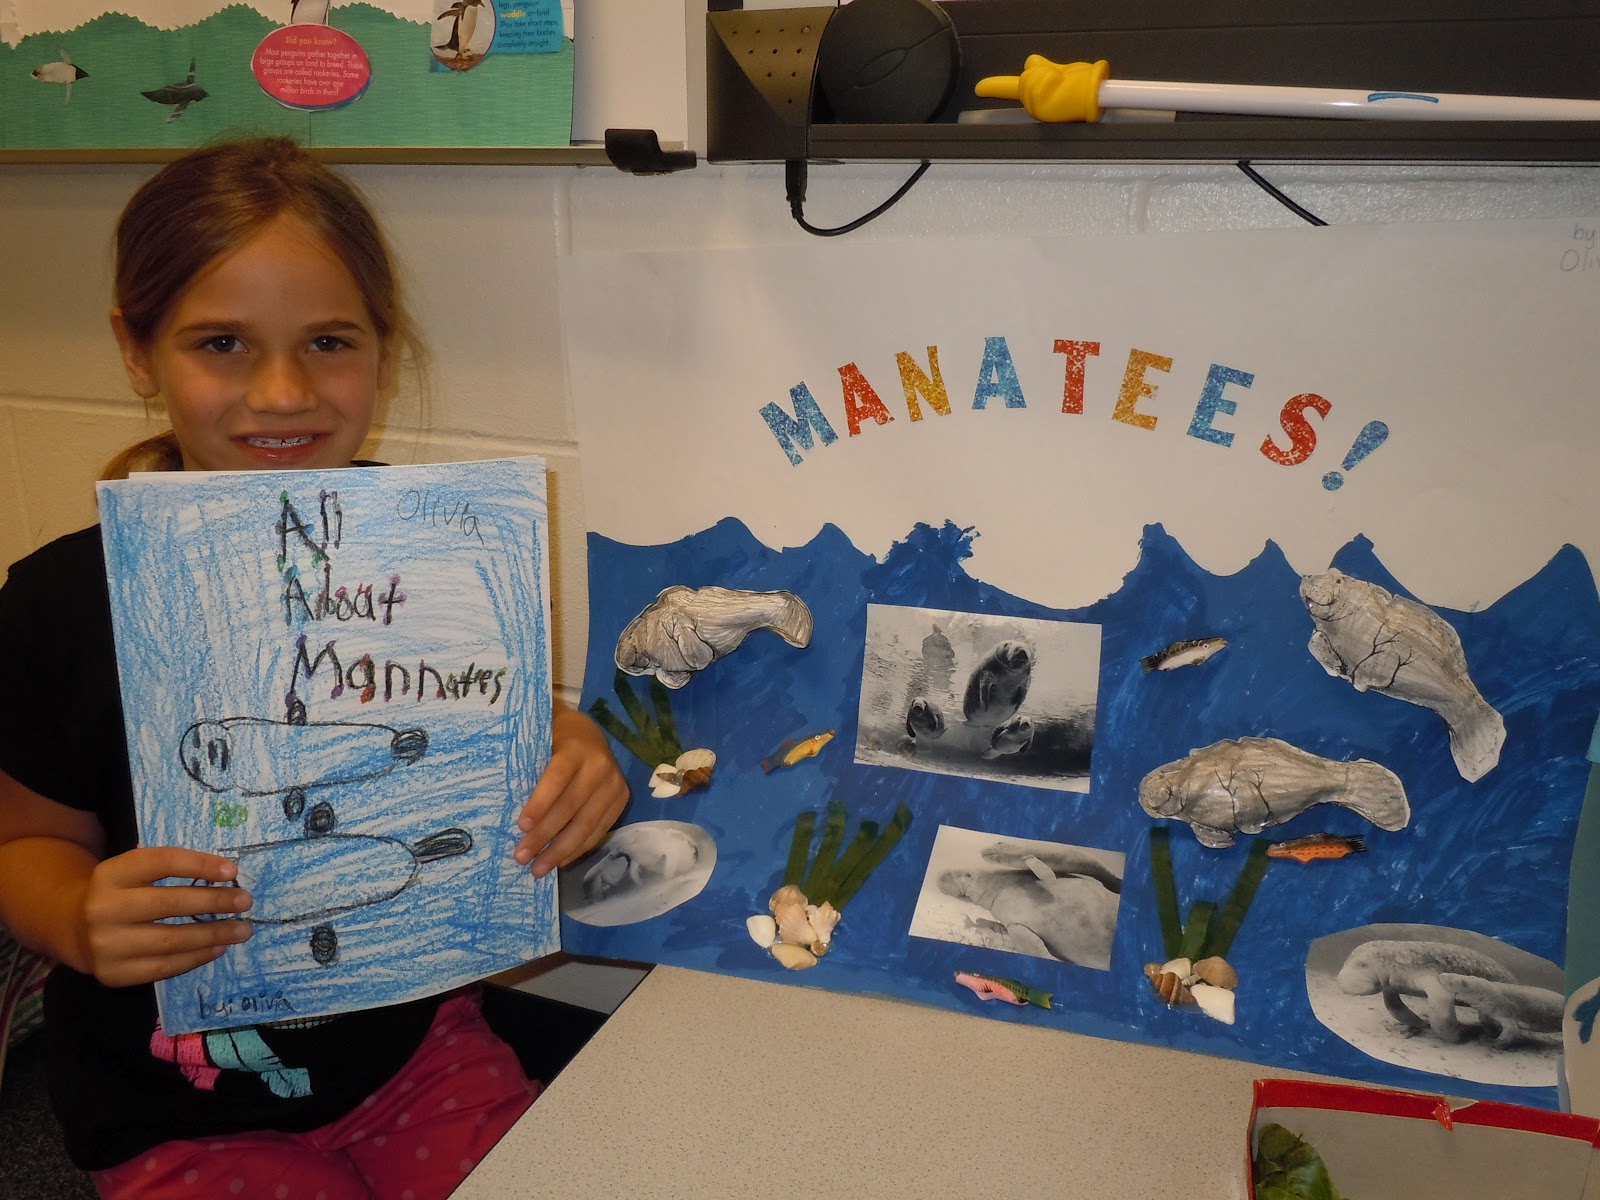 animal research project elementary